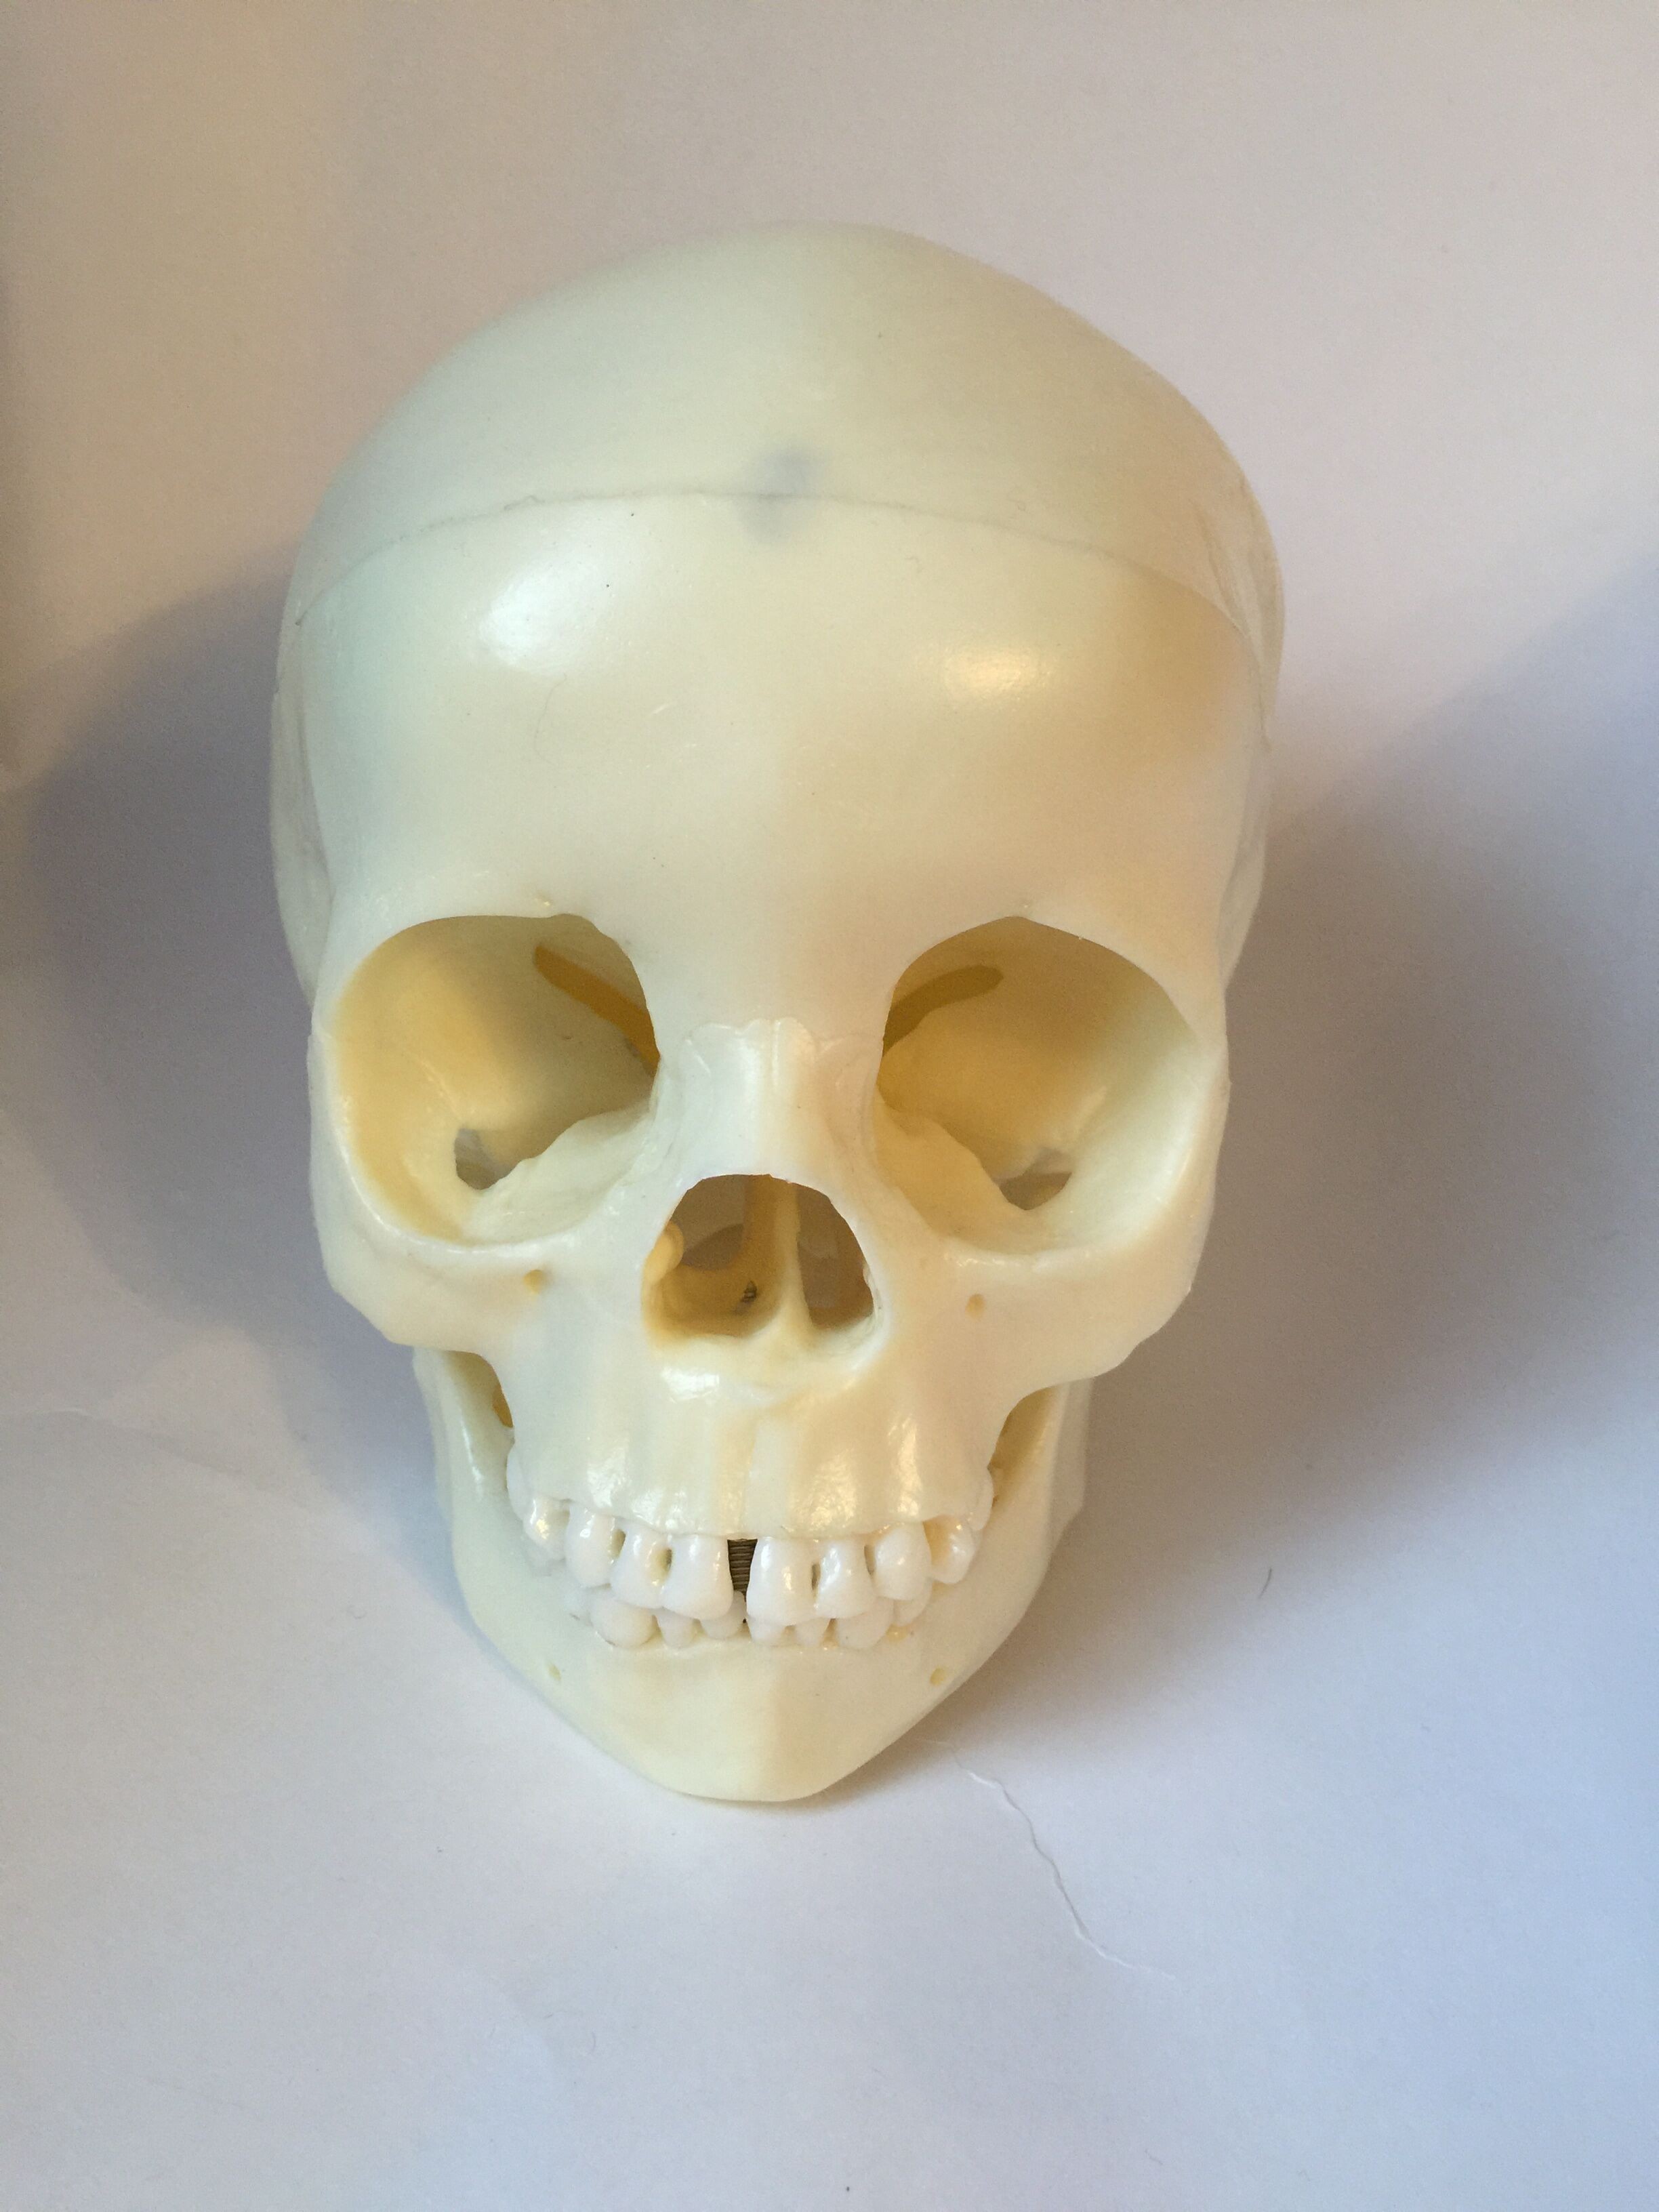 Anatomical Human Child Skull Model, 5-year-old, 3-Part, Life Size